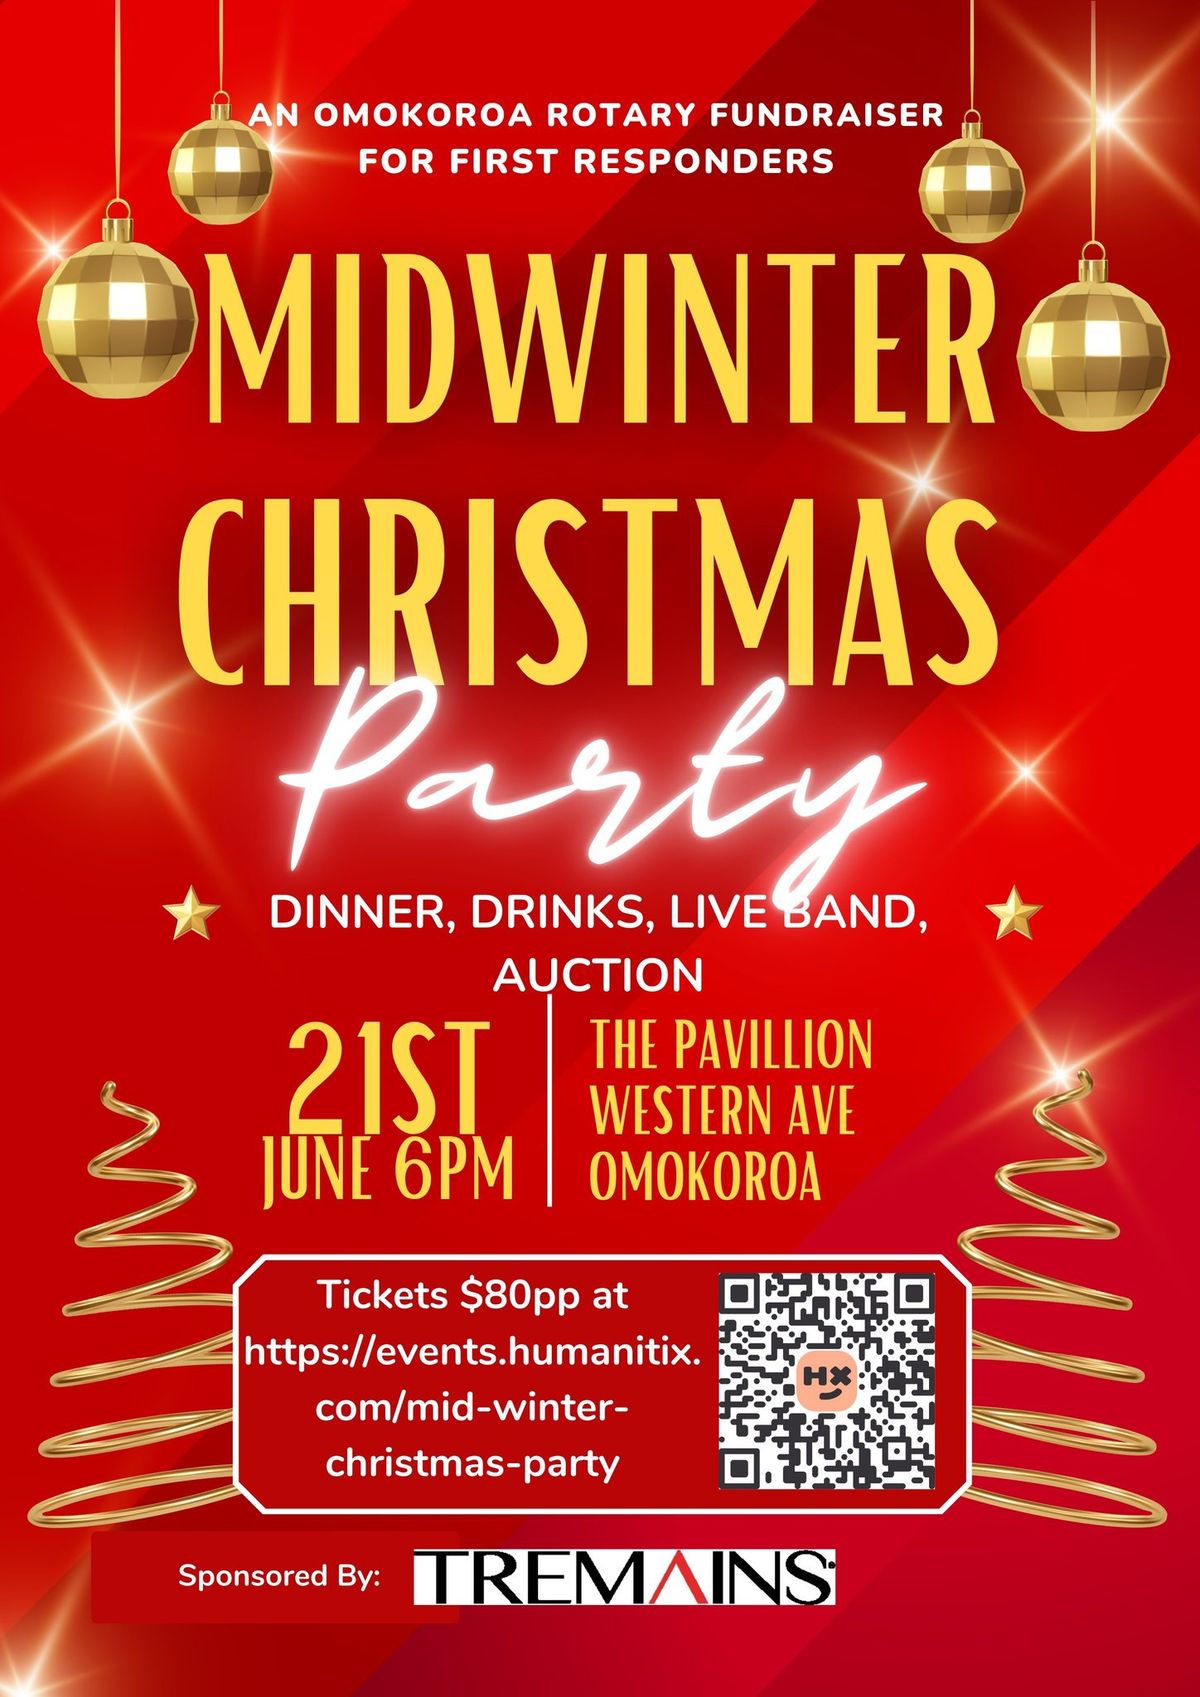 Midwinter Christmas Party!